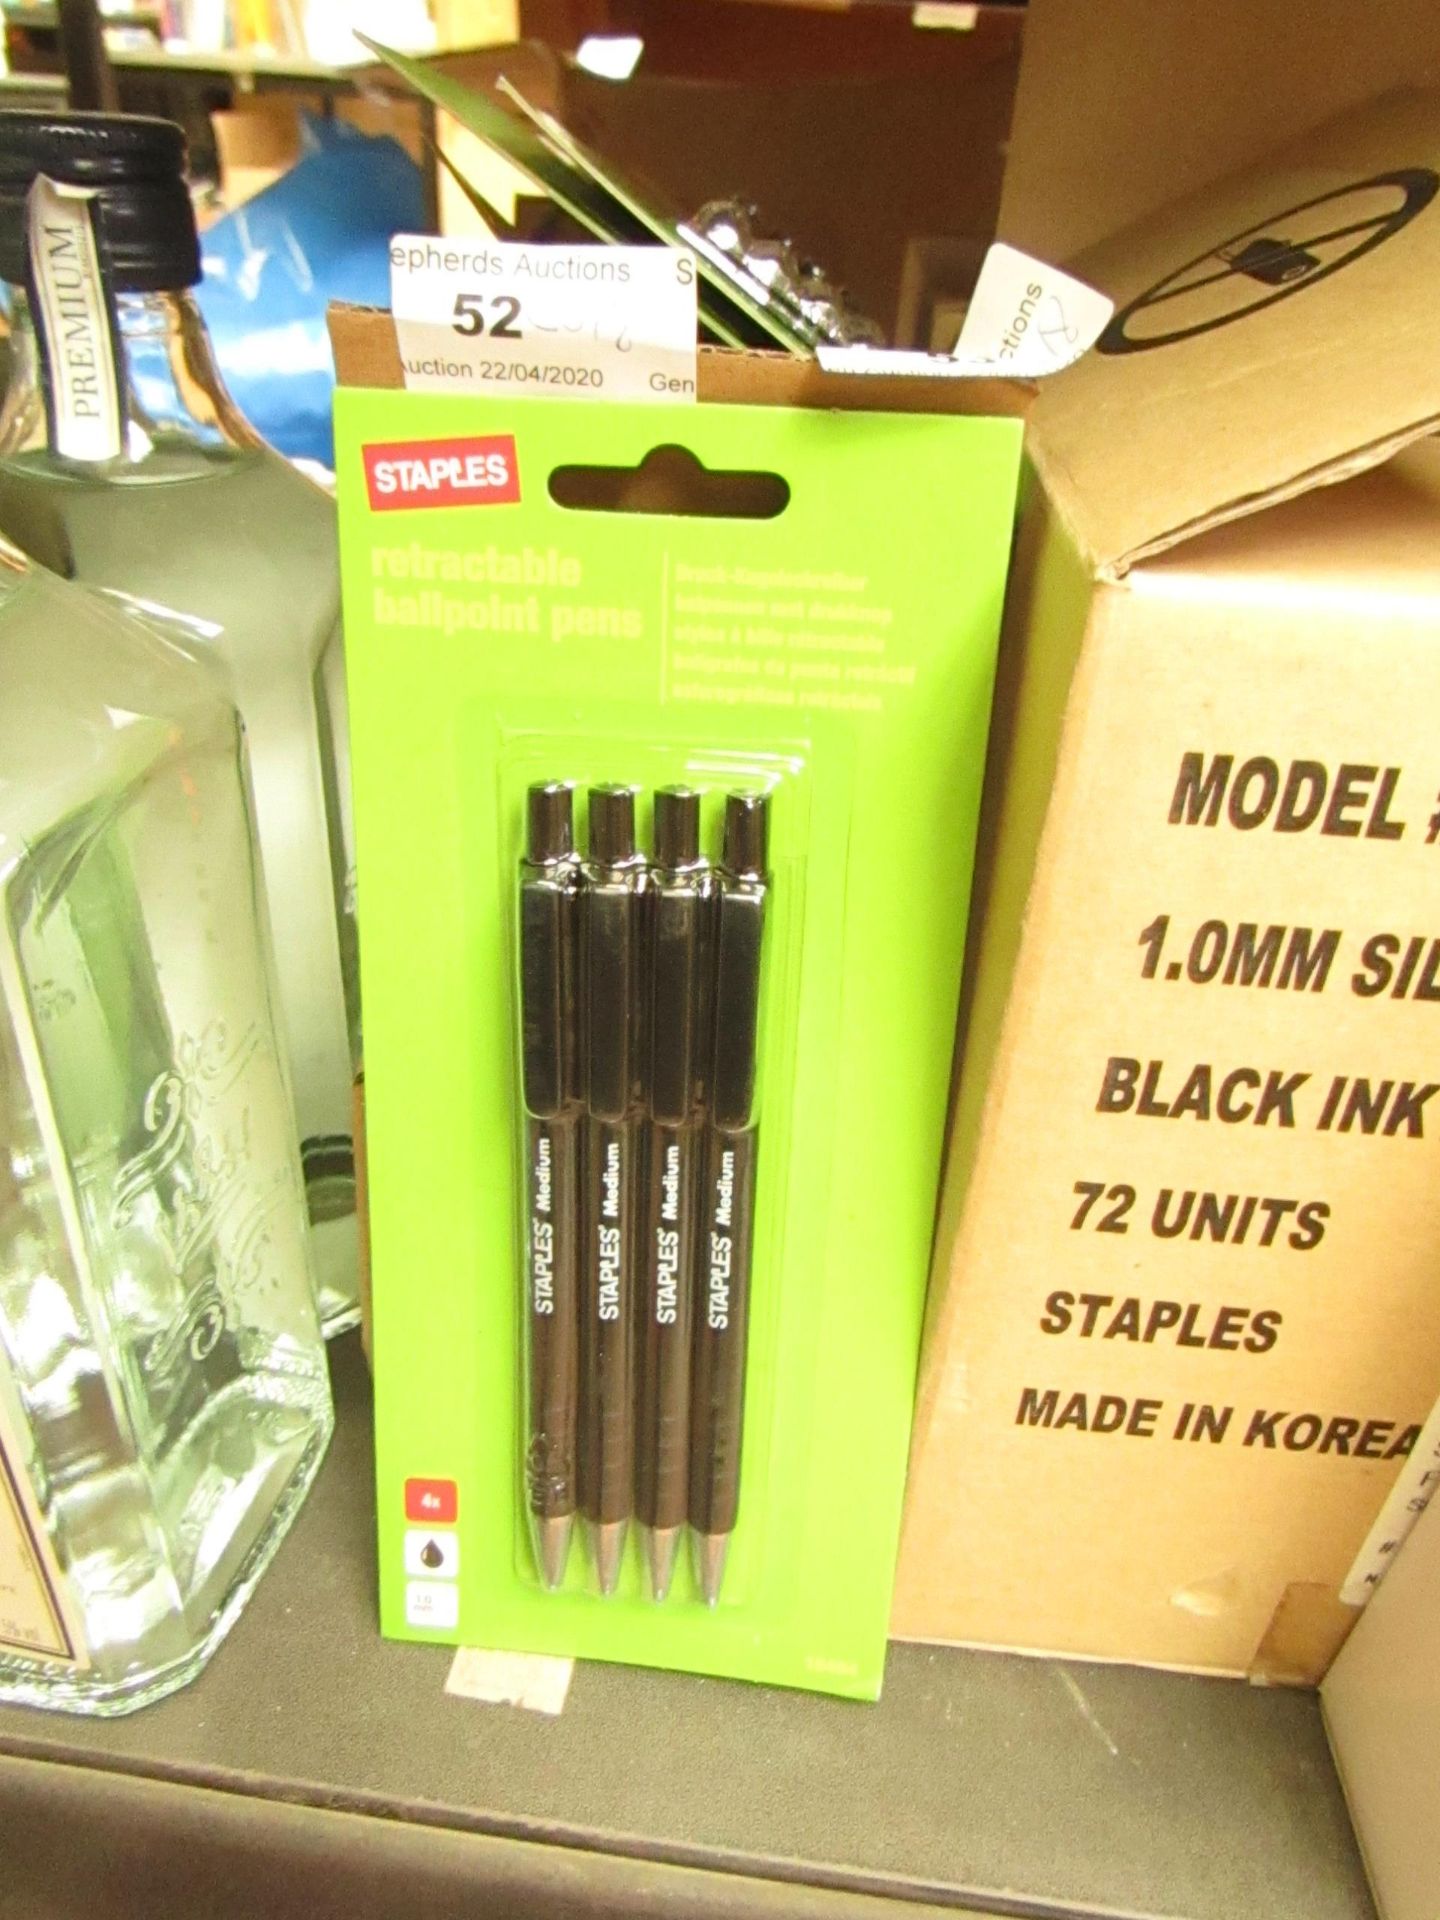 6x Packs of 4 retractable ballpoint pens, new and packaged.